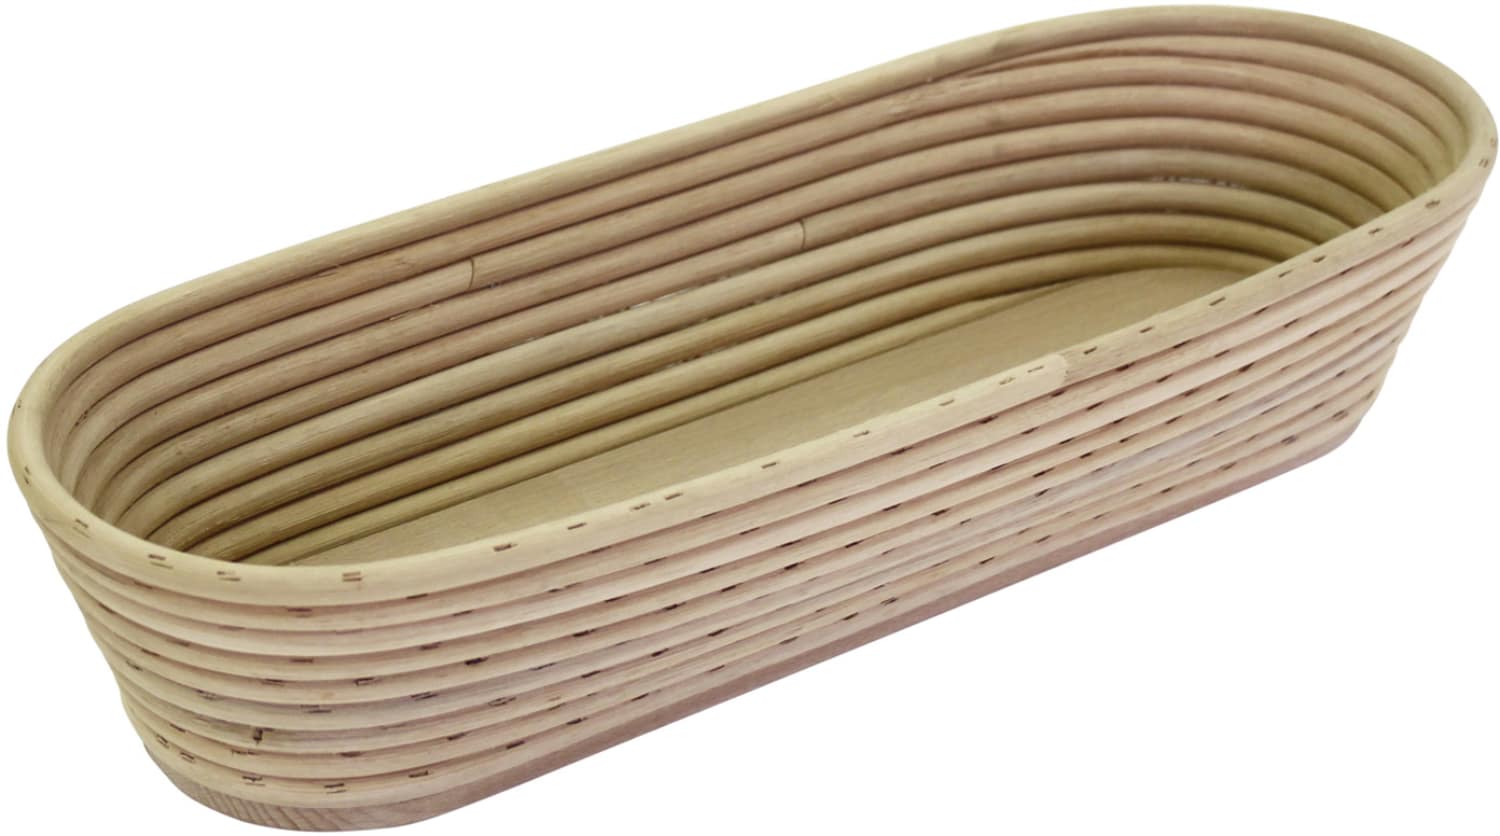 Bread proofing baskets long, round shape wooden bottom